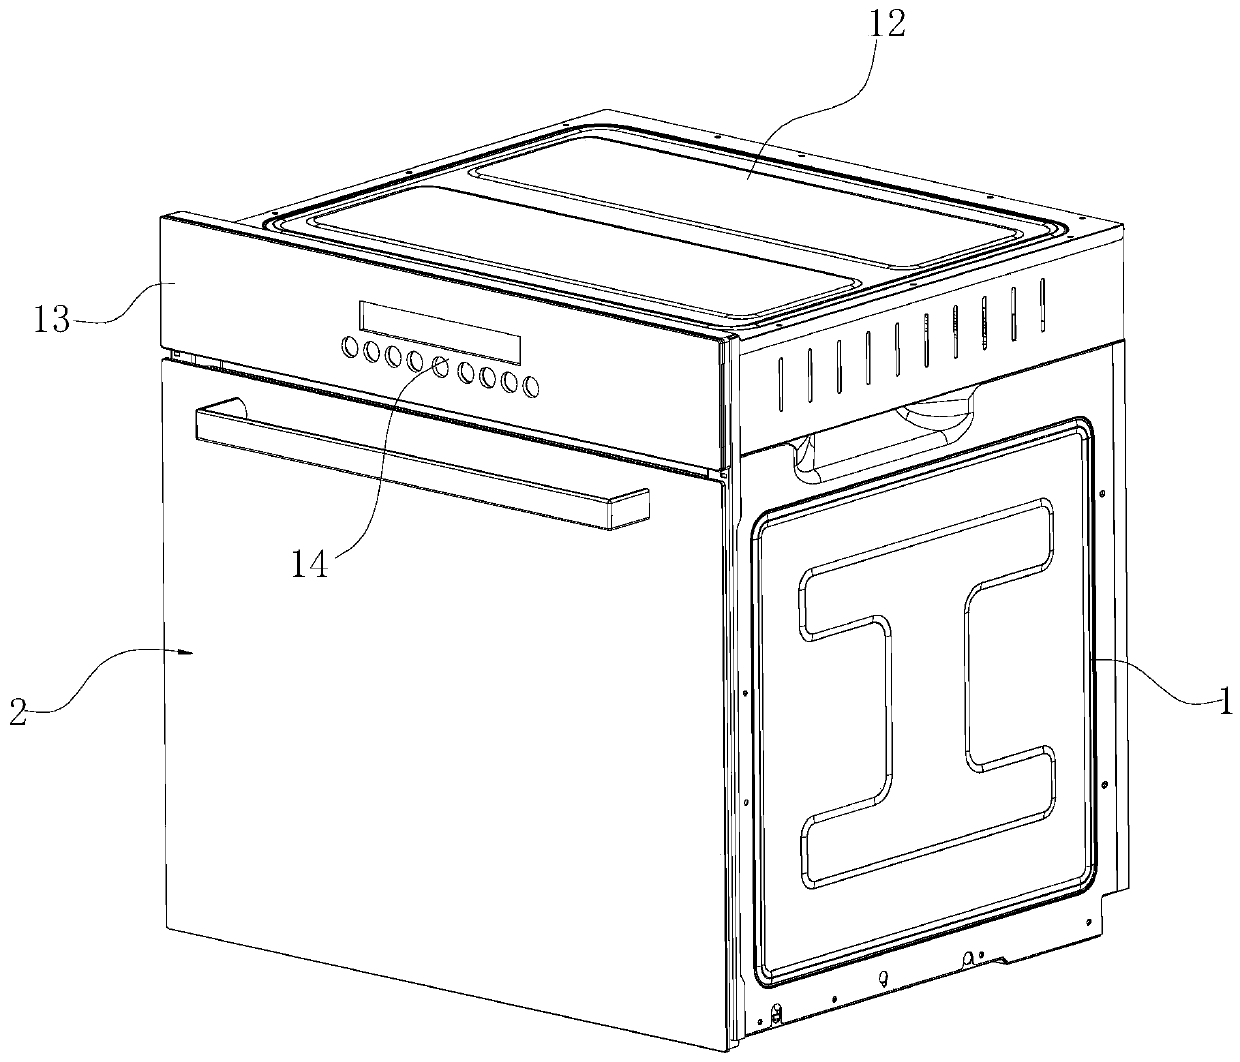 Baking oven with heat dissipation structure